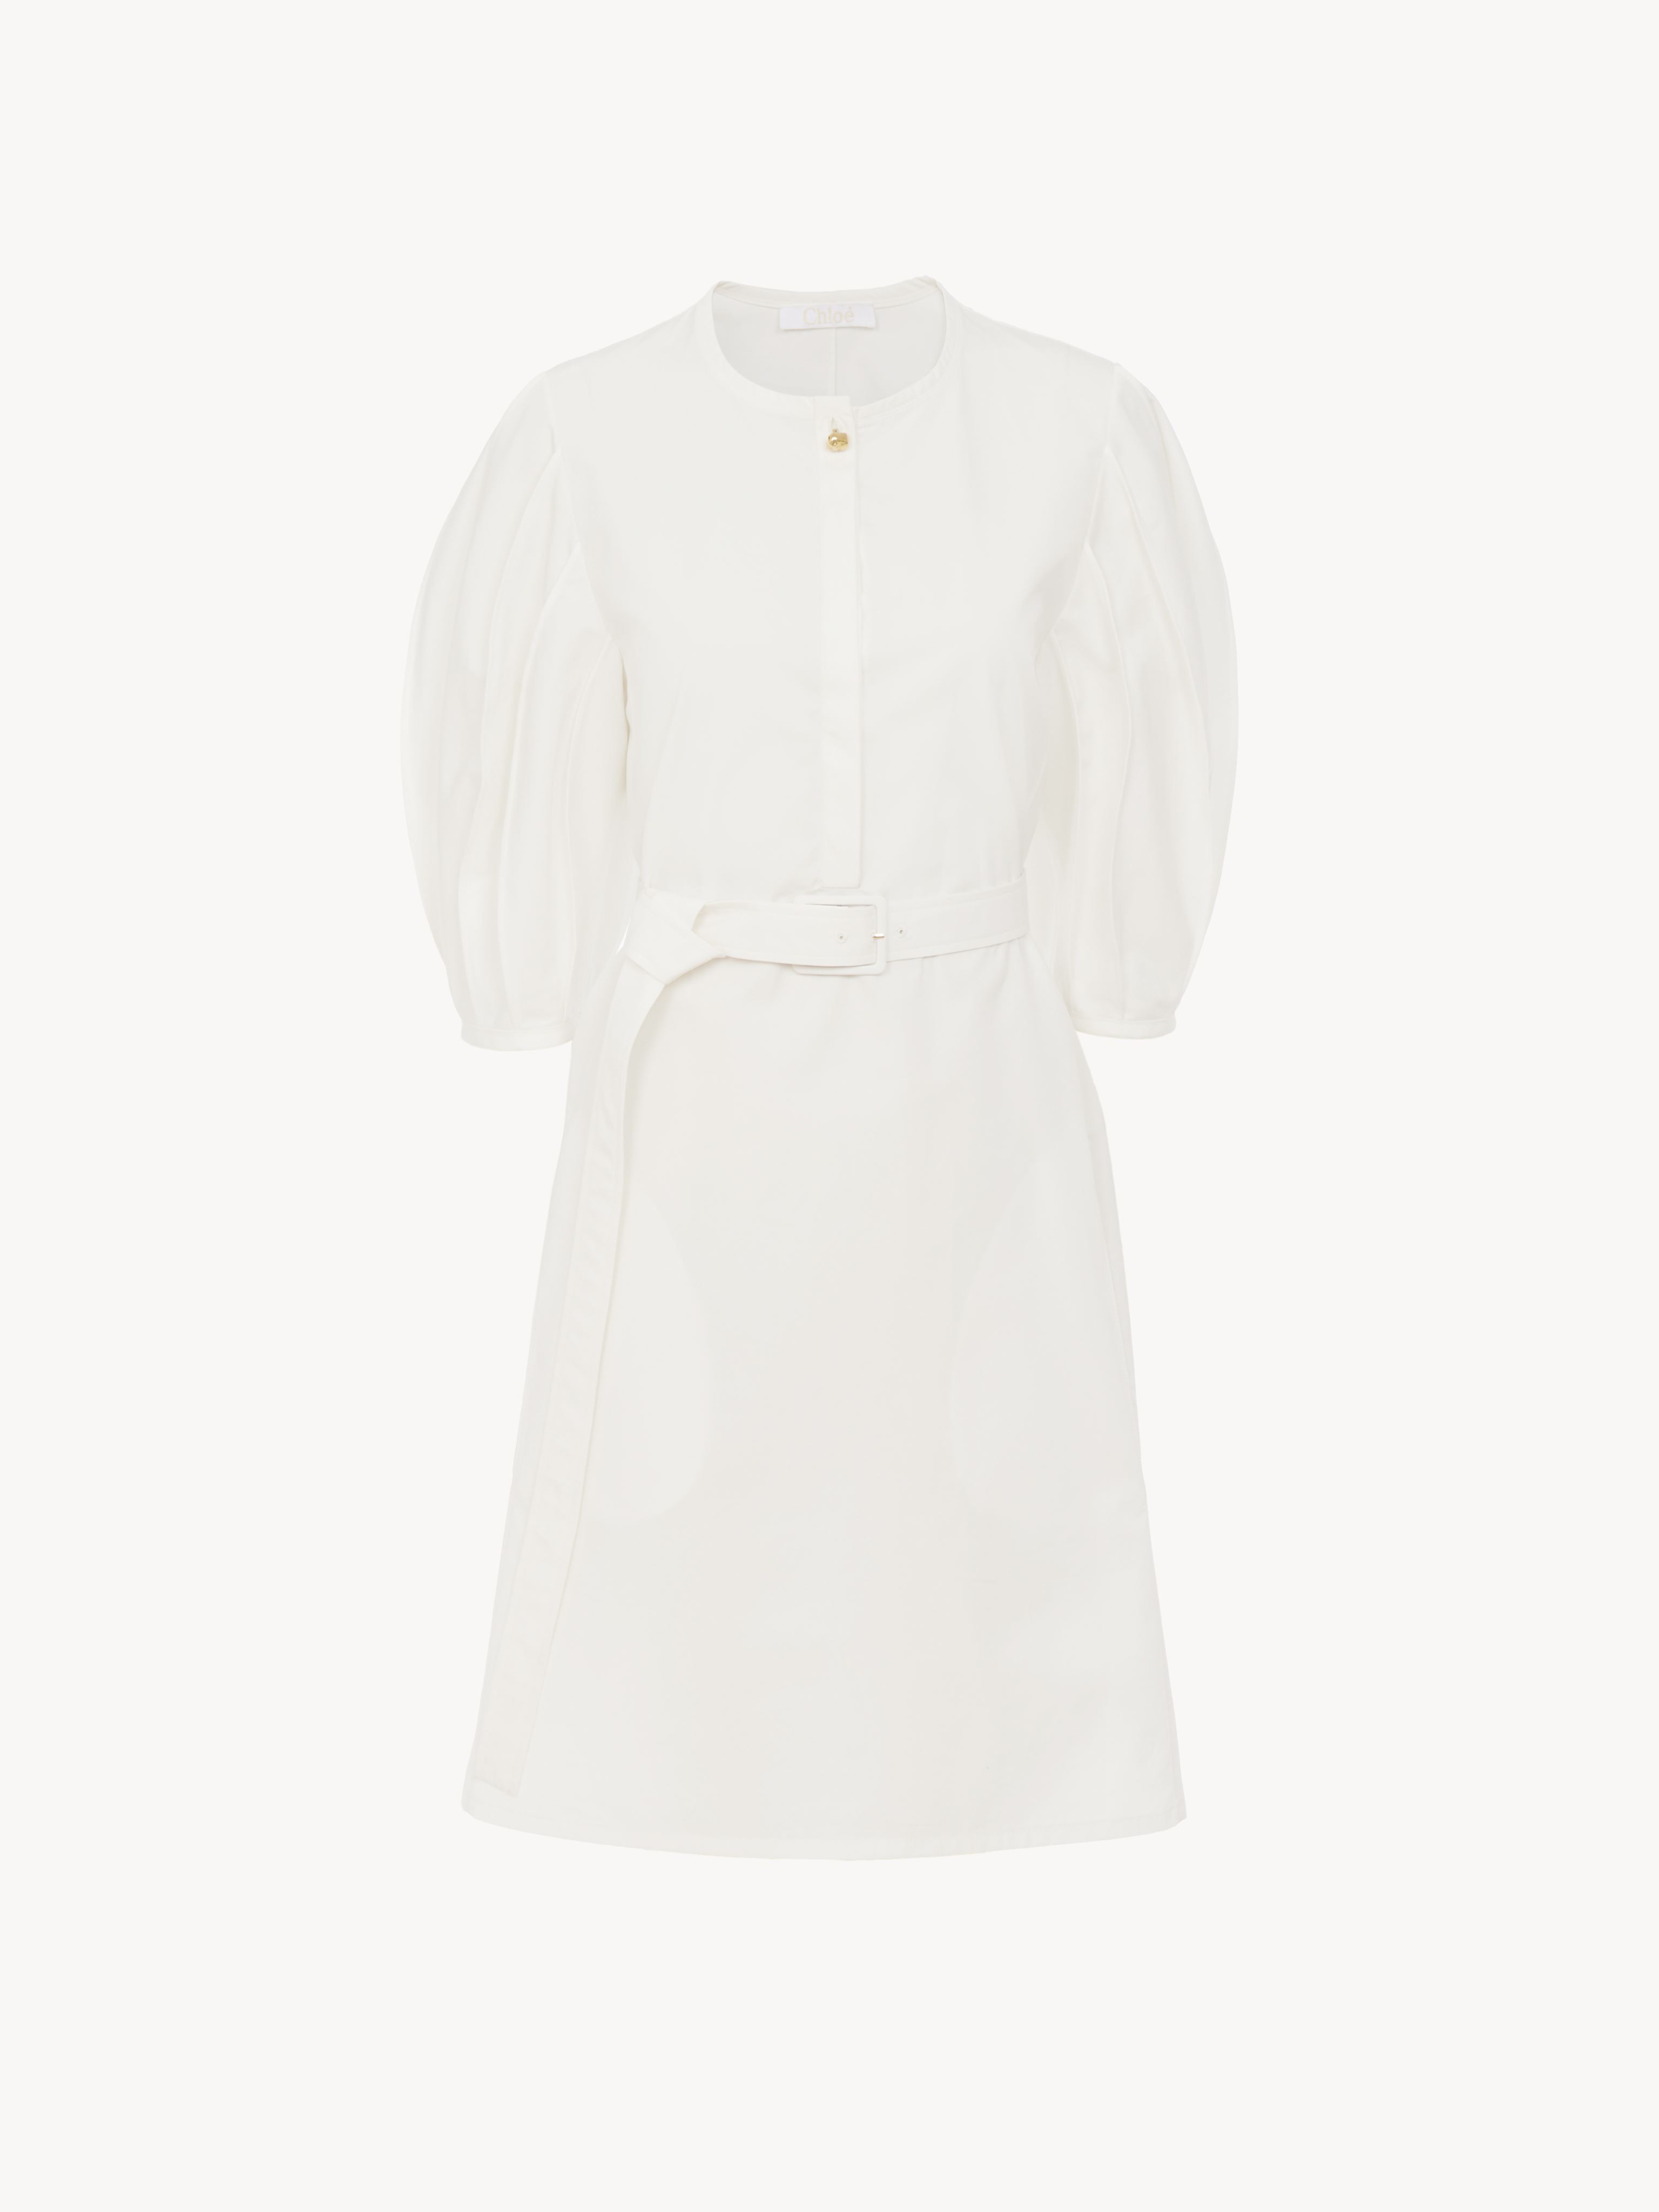 Chloé Robe Chemise Courte Manches « Lanterne » Femme Brun Taille 42 100% Coton, Pinctada Maxima, Farmed, C In Brown